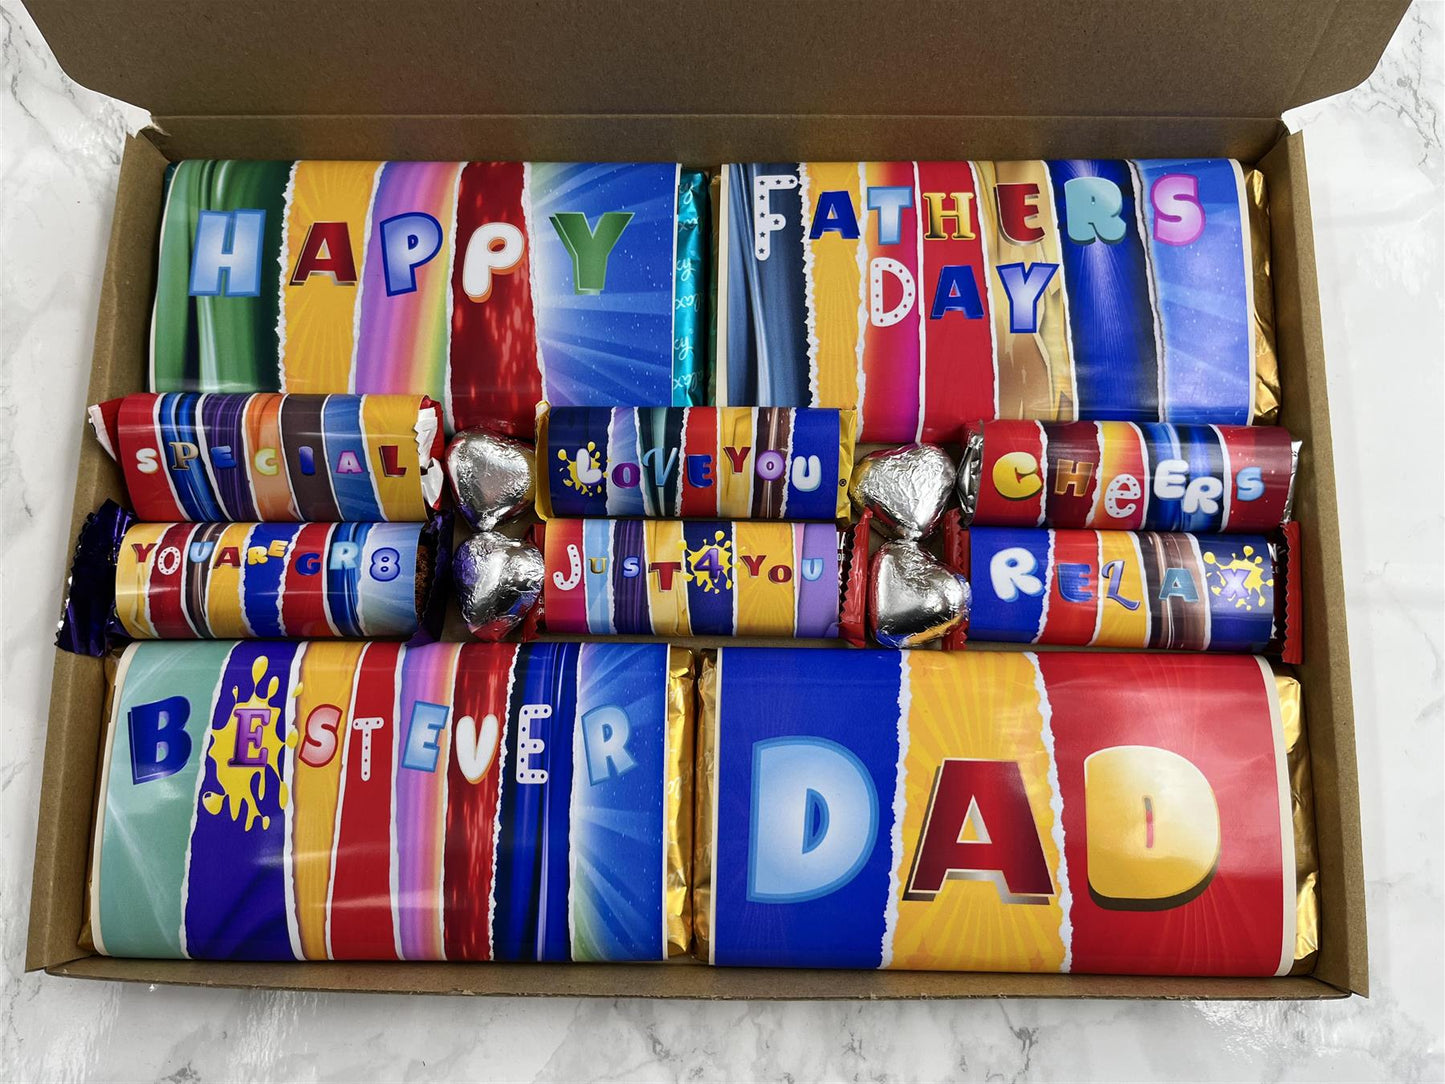 Fun Fathers Day Novelty Chocolate Wrapper Gift Box - Dad